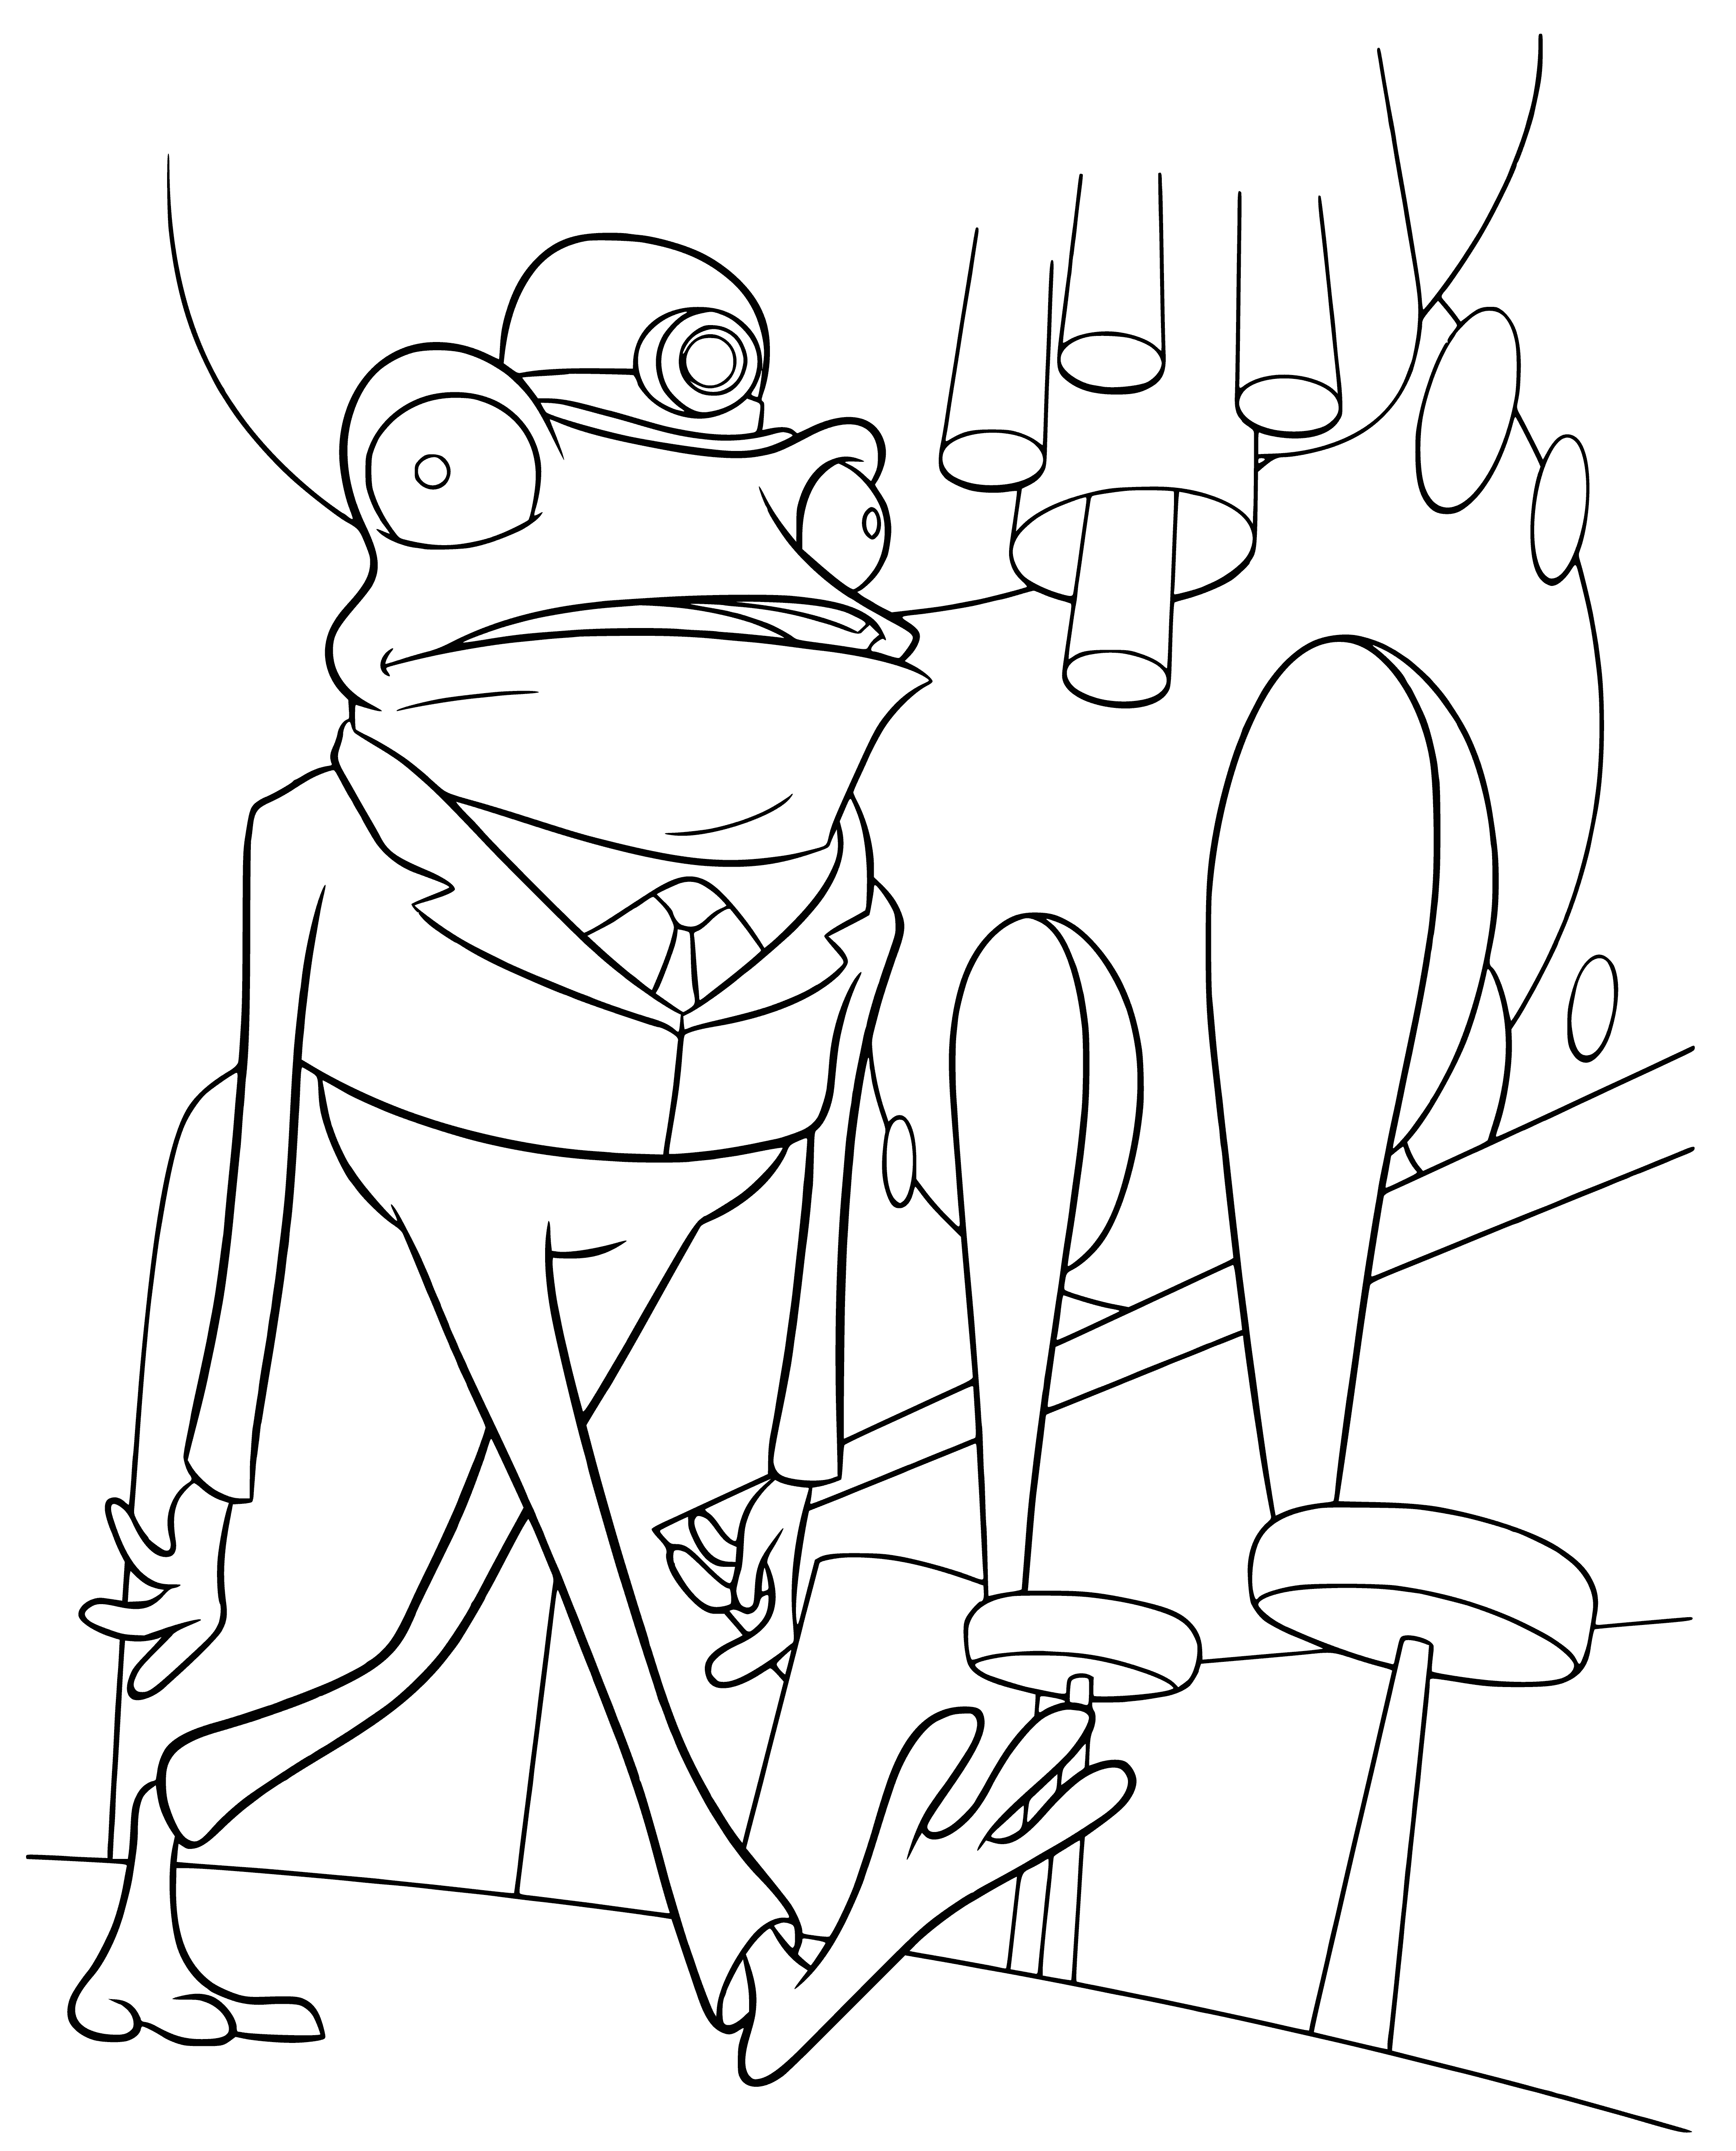 Zombie frog coloring page